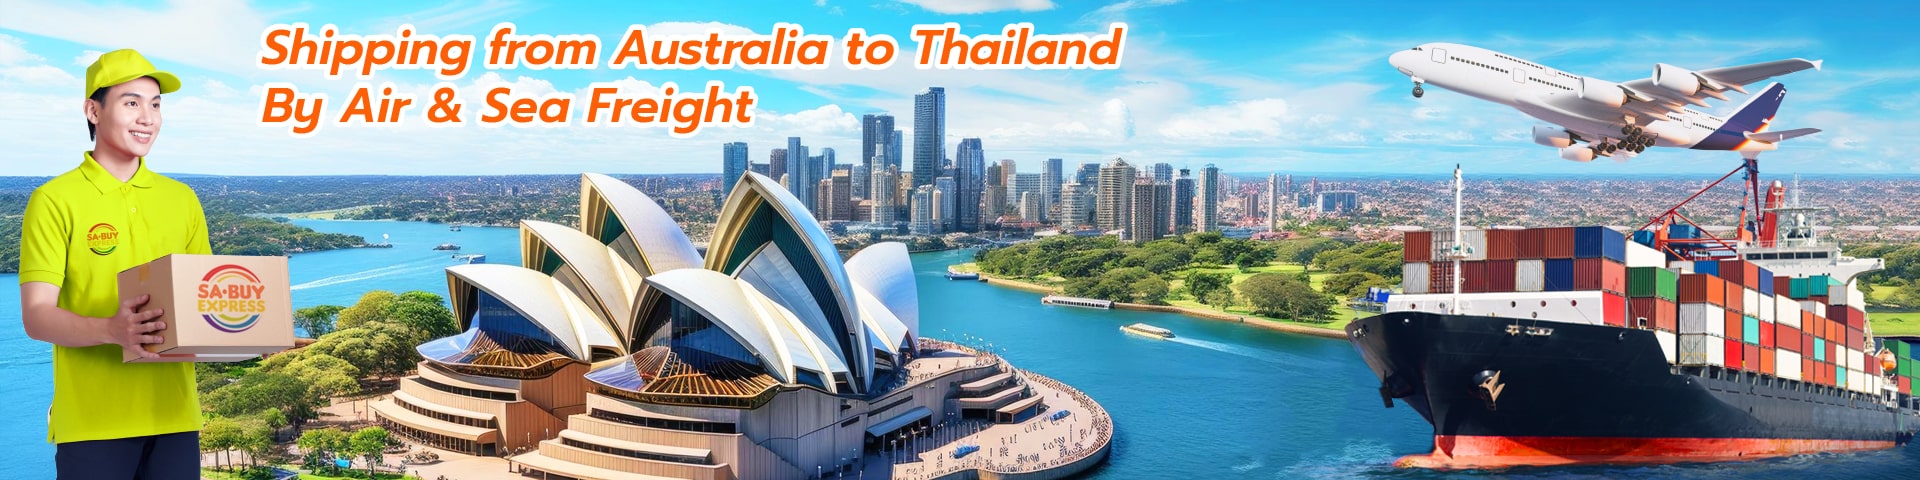 SHIPPING FROM AUSTRALIA TO THAILAND BY AIR AND SEA FREIGHT